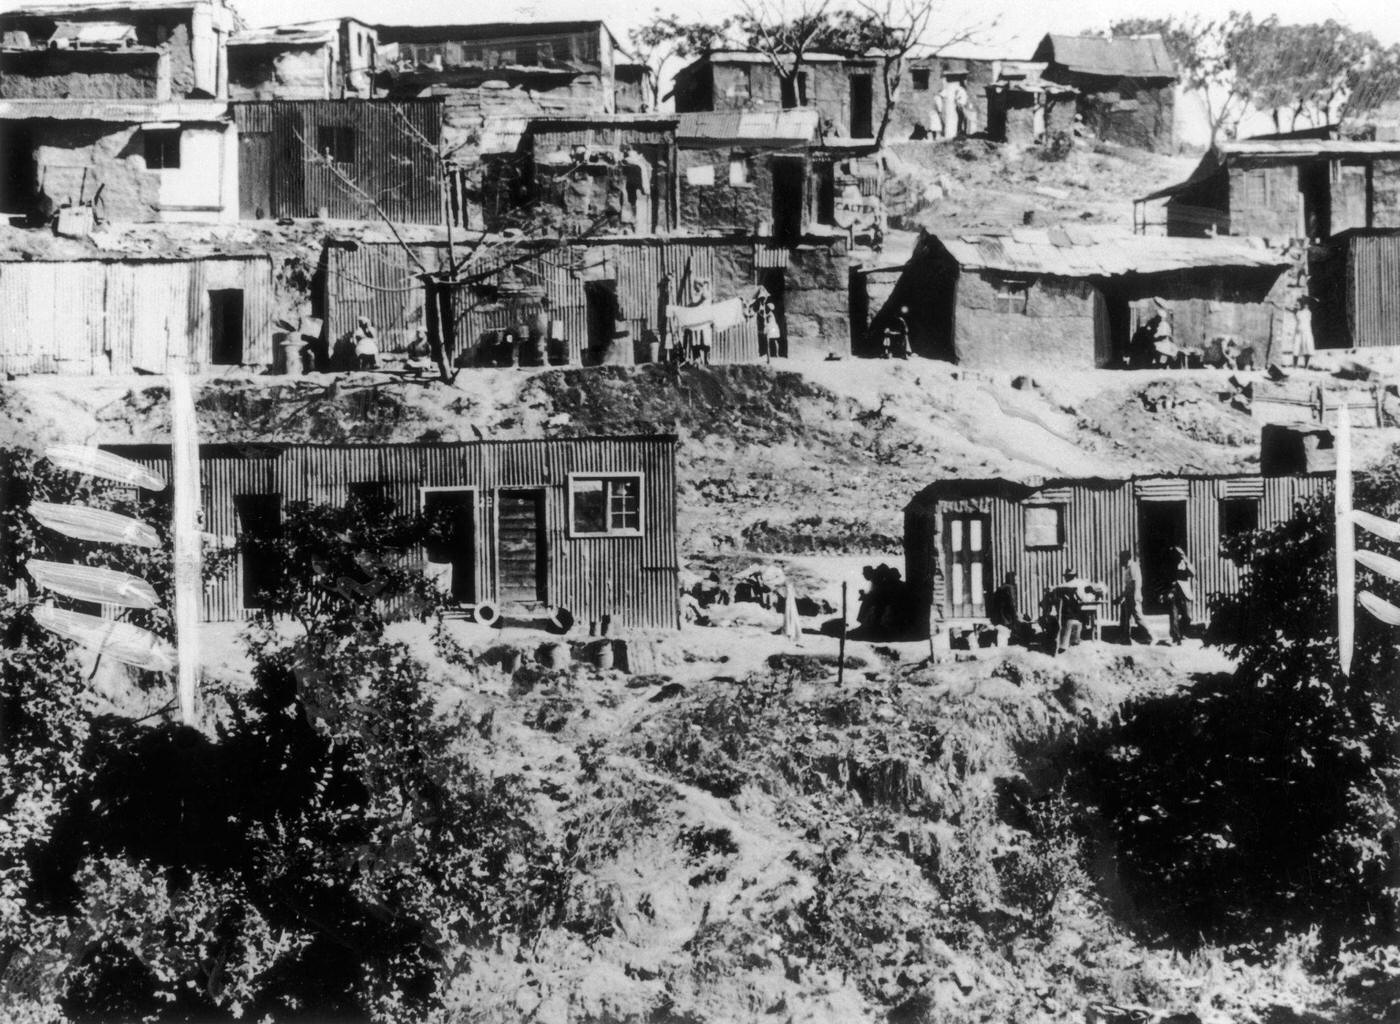 The Surroundings of Cape Town where Black People live on March 31, 1960.